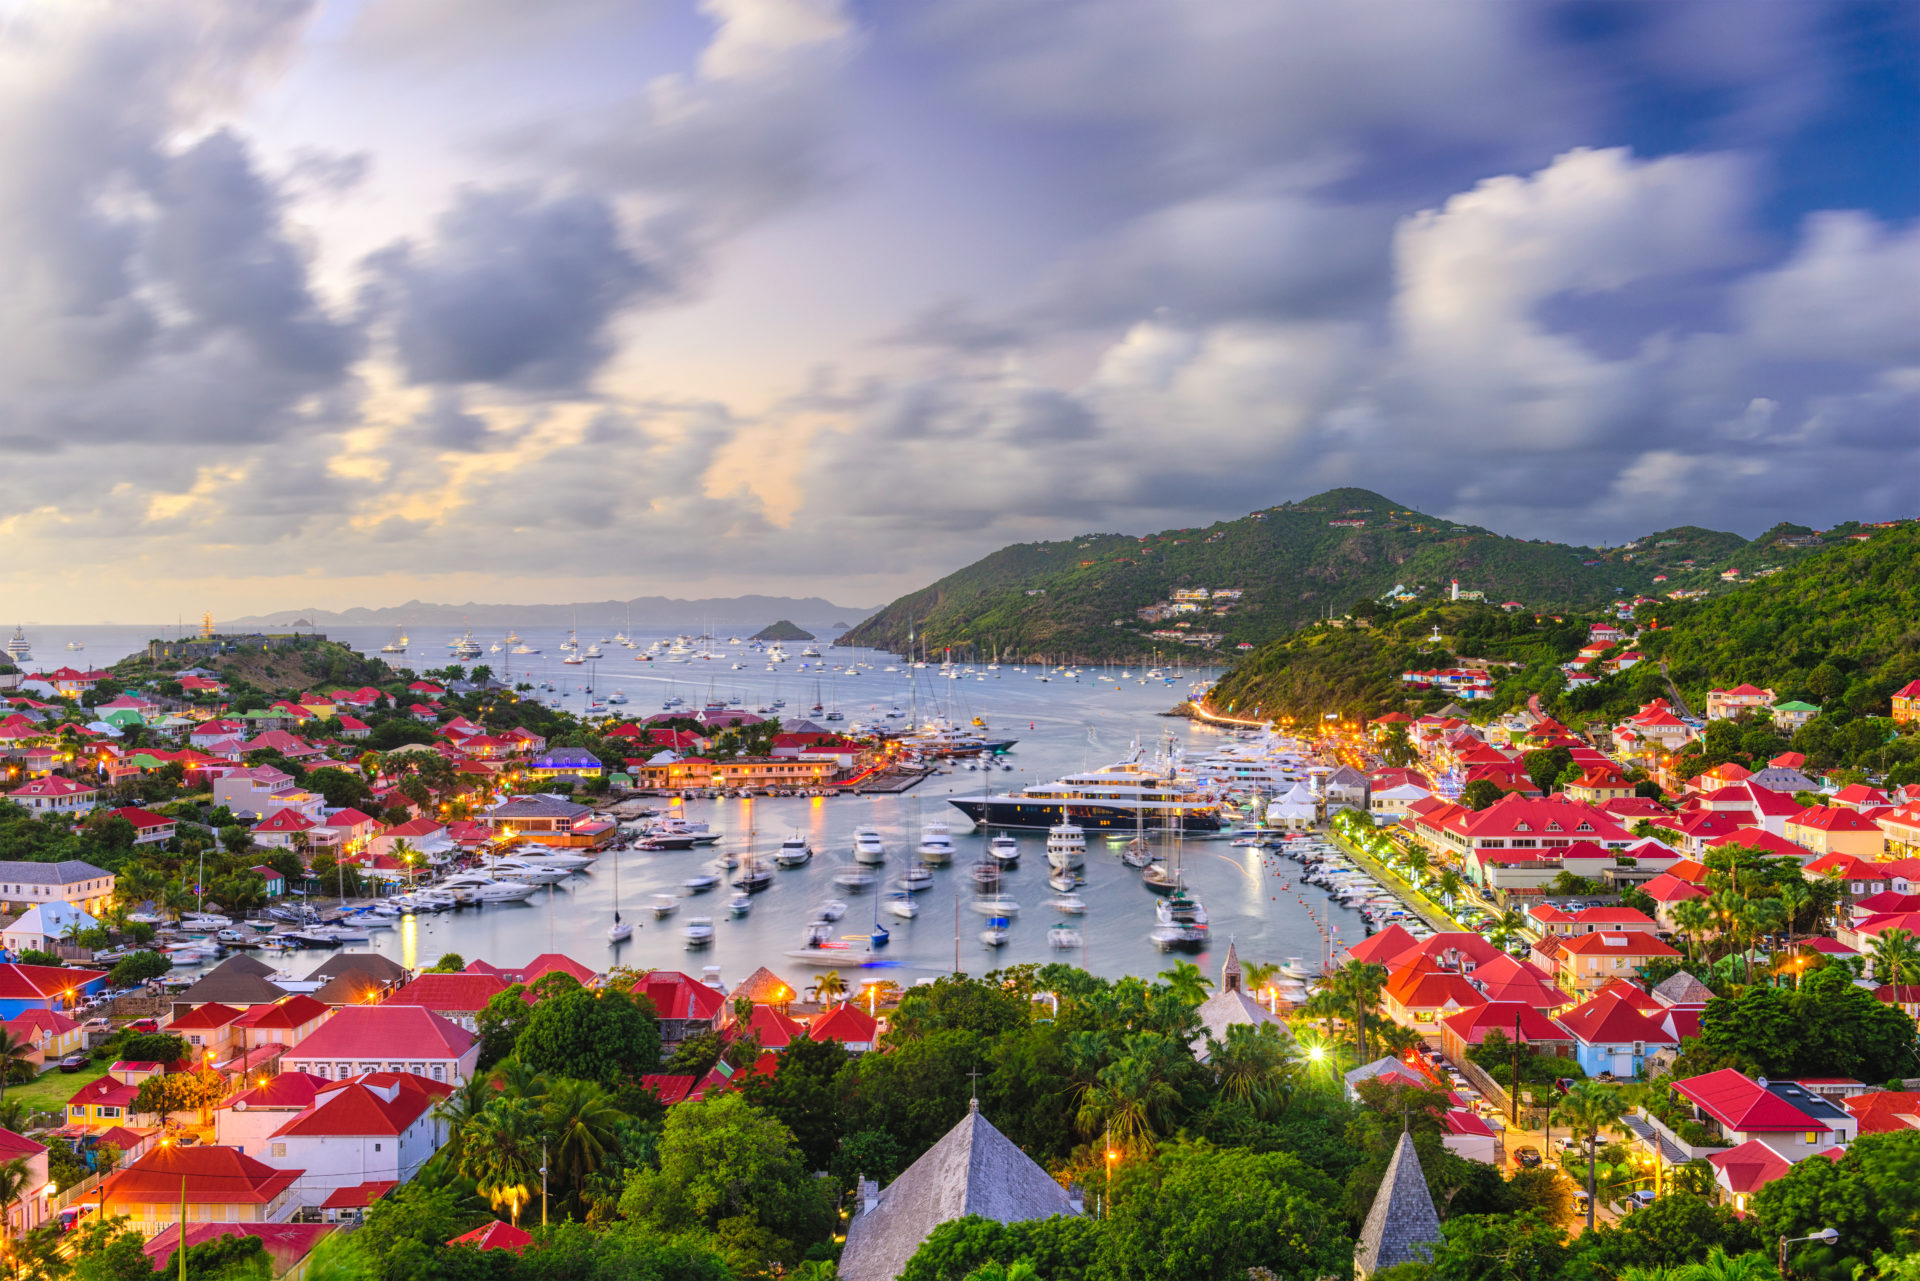 Luxury shopping and designer boutiques in Gustavia, St. Barts